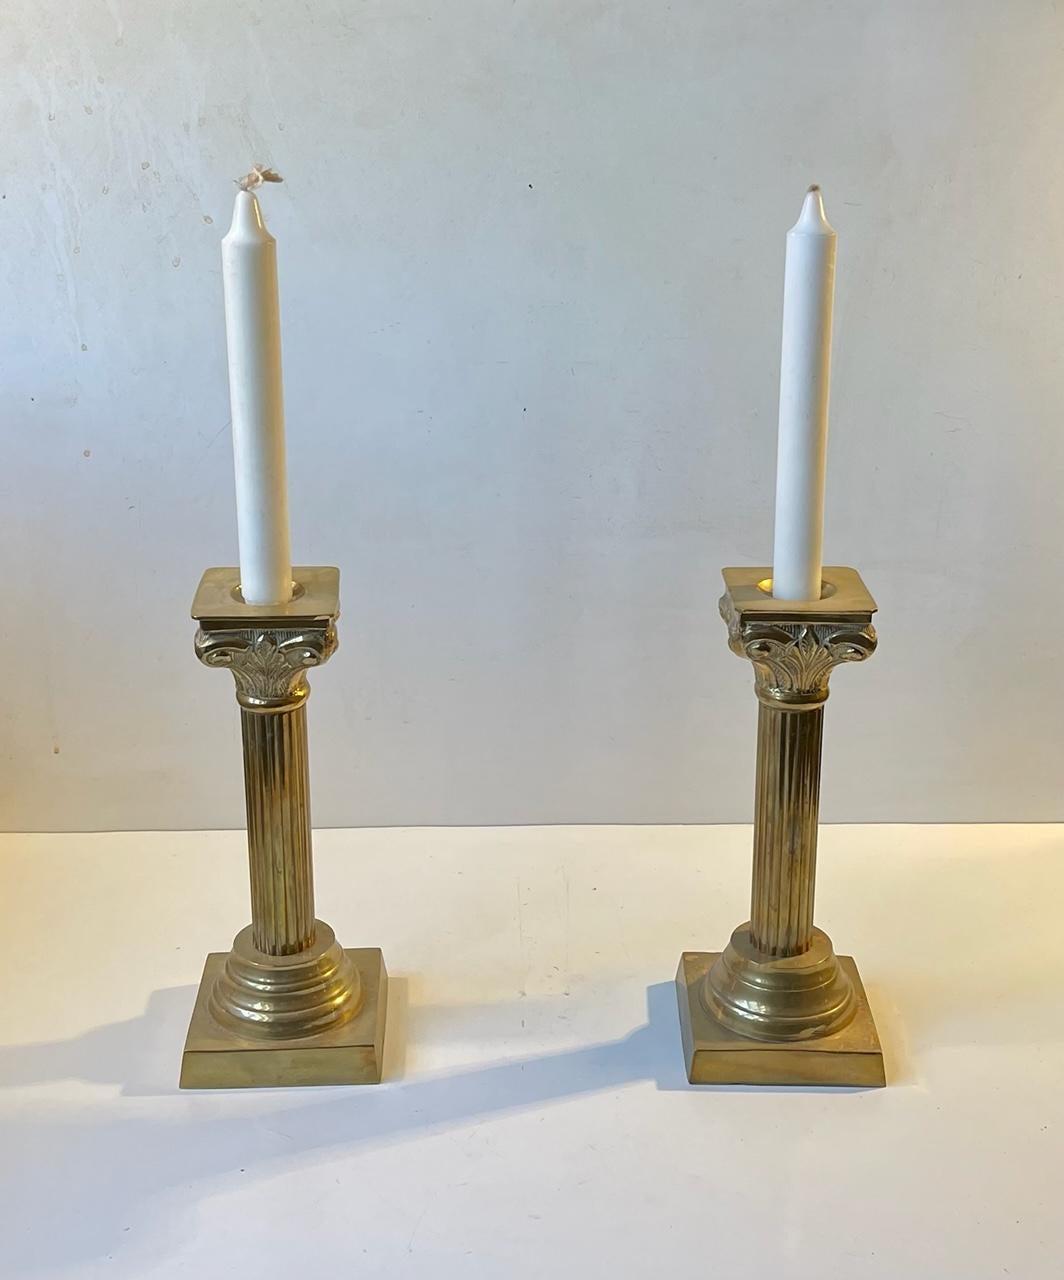 A matching pair of neo-classically styled candleholders. They are cast in solid brass and shaped as Corinthian Columns. Unknown European maker circa 1970-80. They are to be fitted with regular sized candles. Measurements: H: 24 cm, W/D: 9 cm, Top: